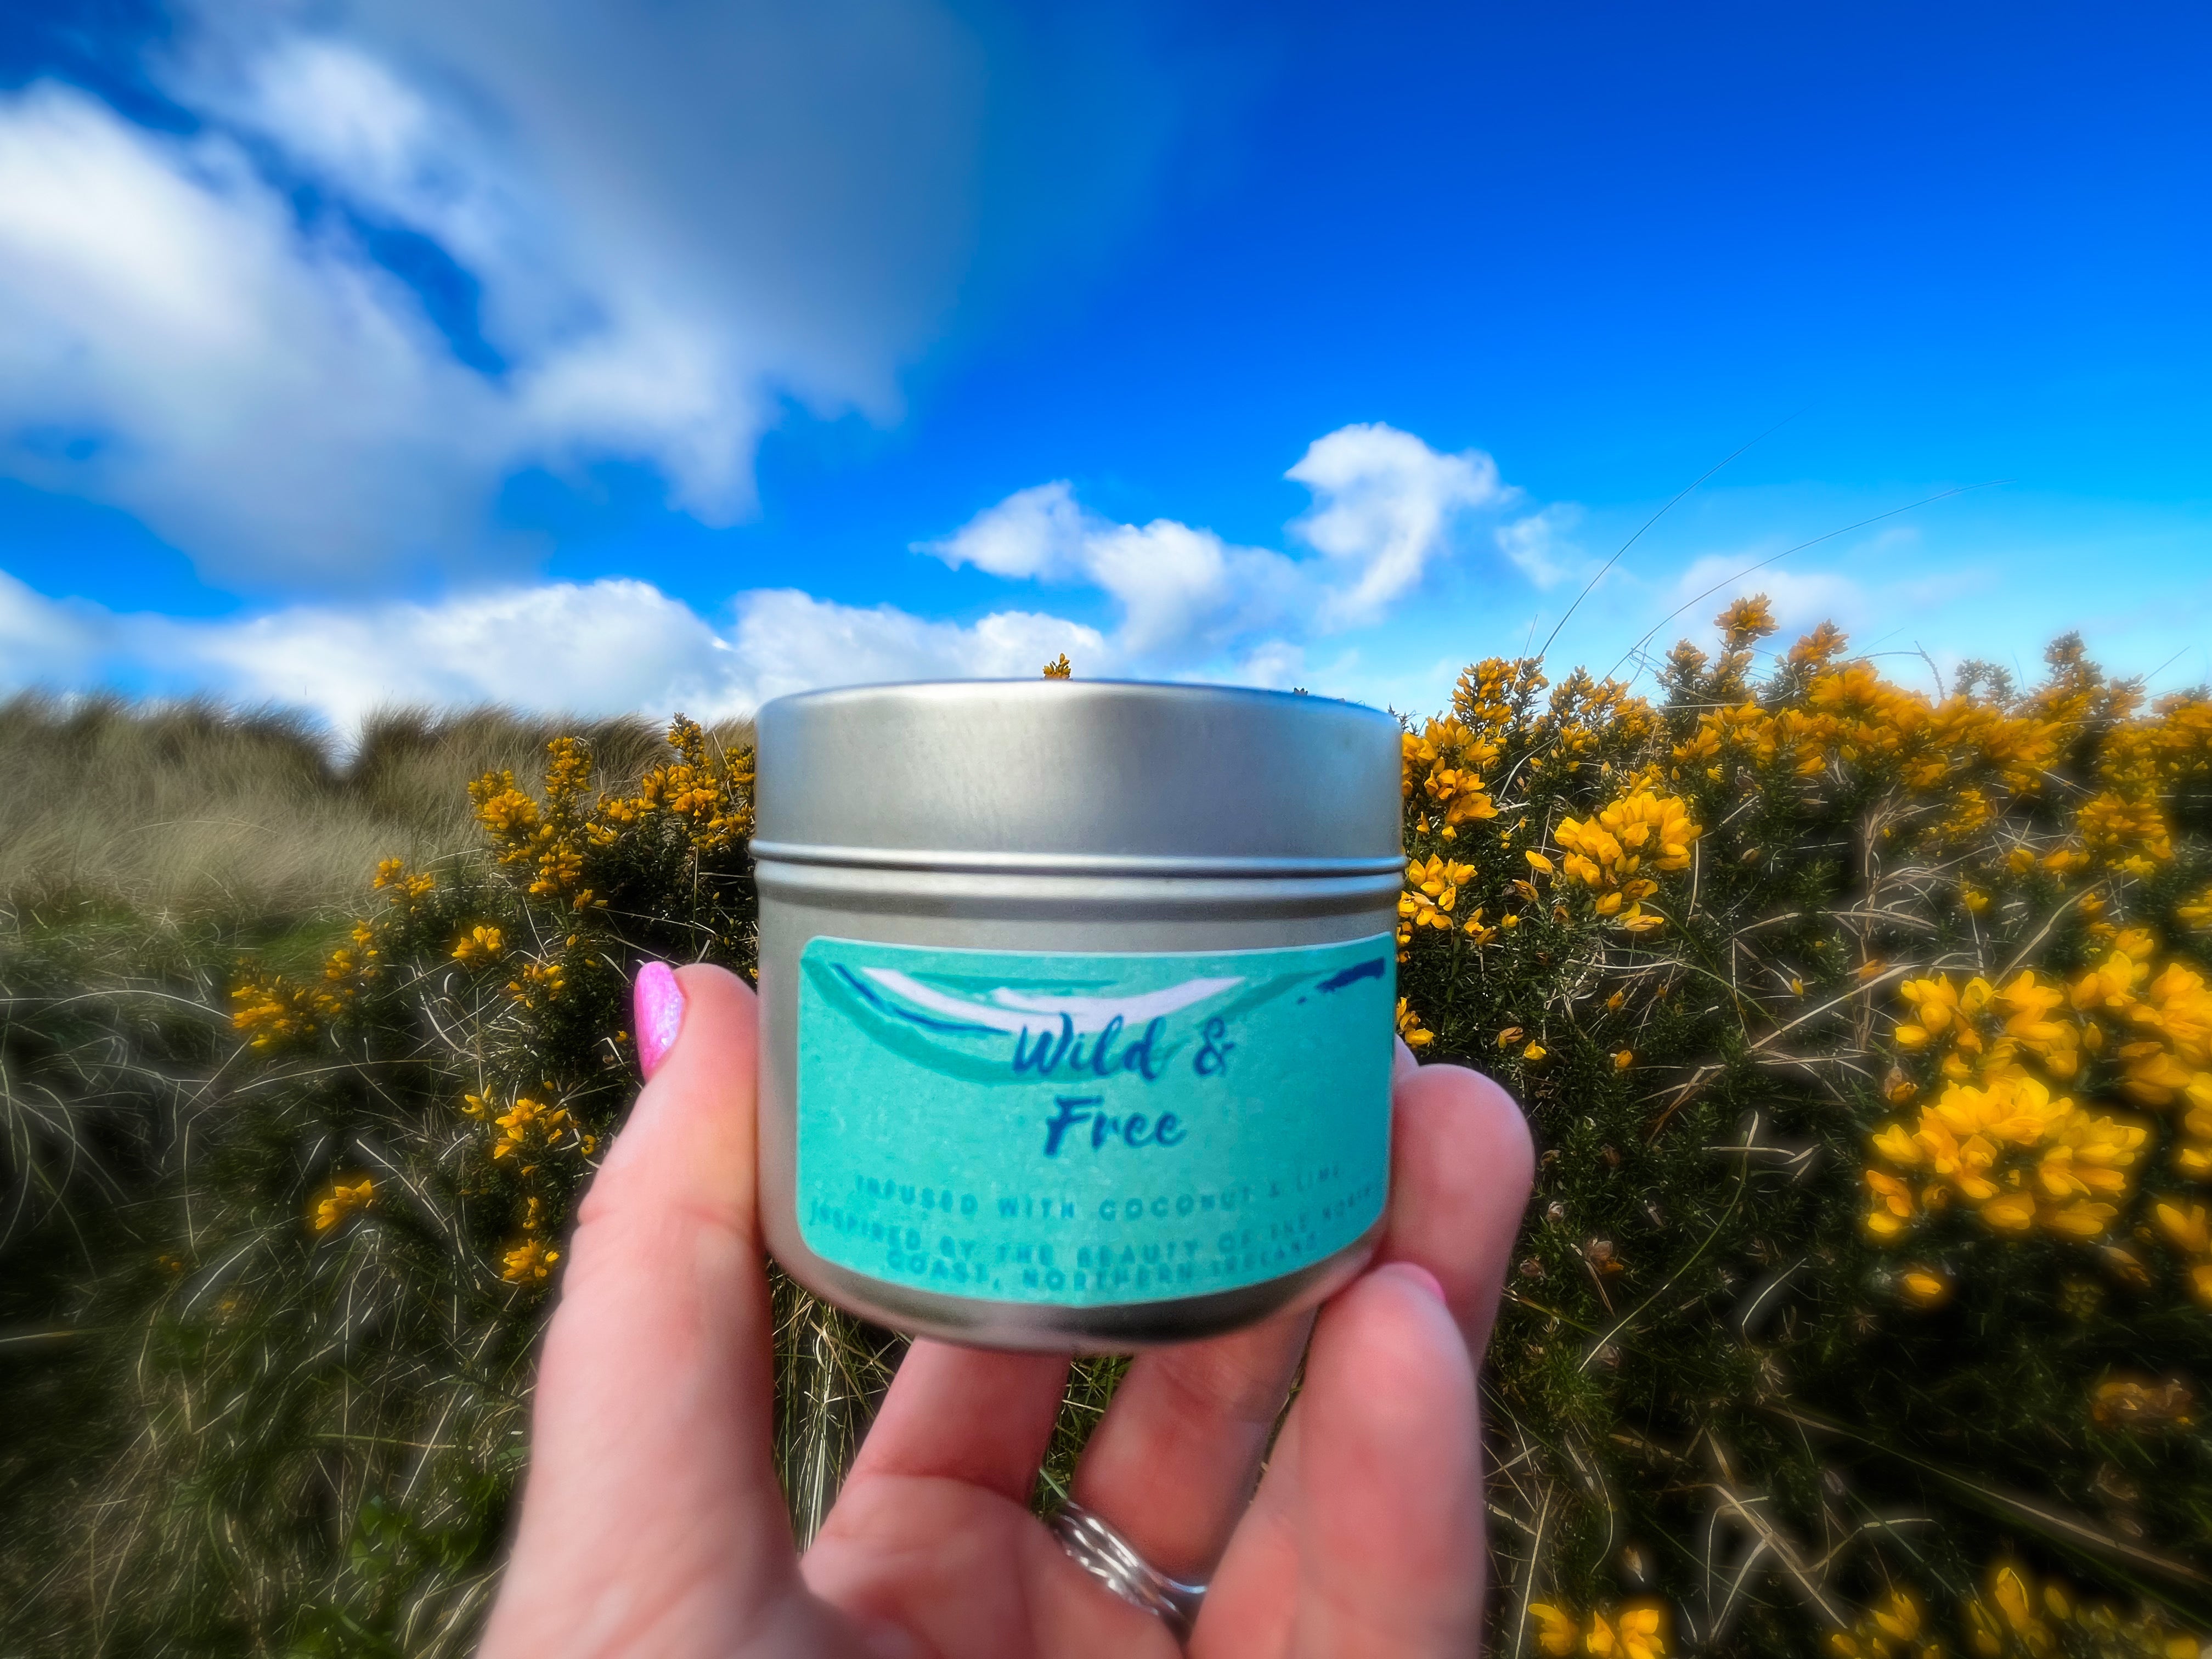 'WILD & FREE' Candle